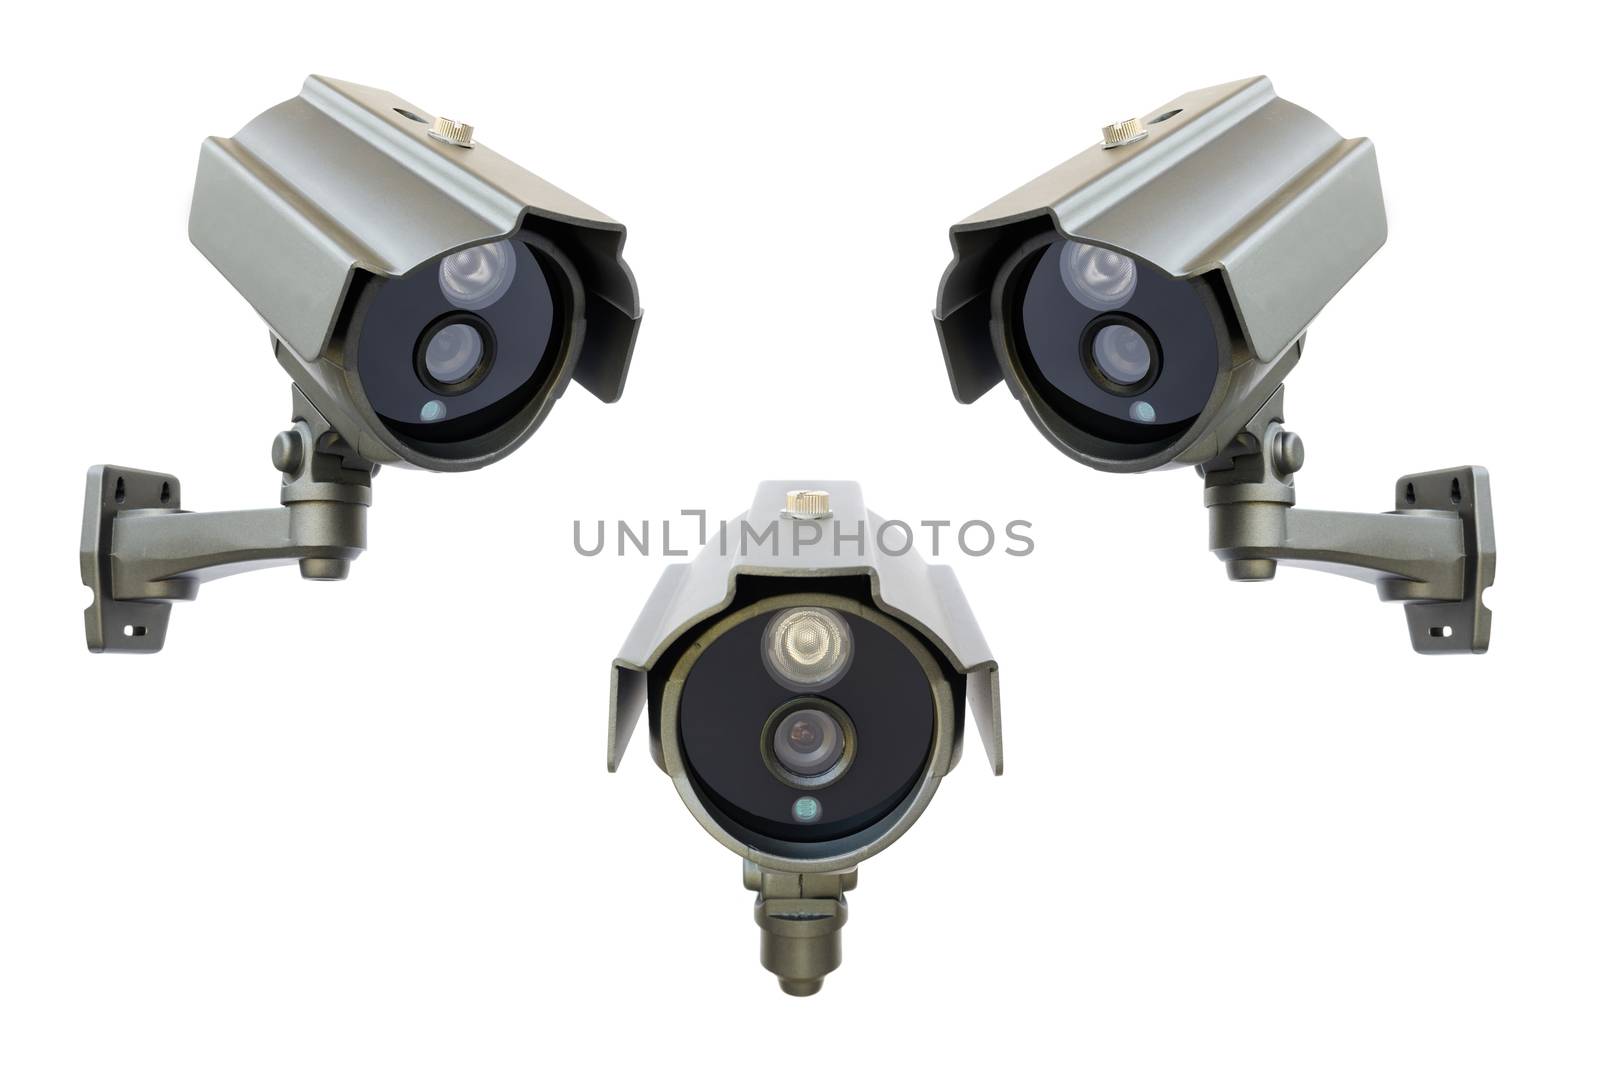 CCTV security camera on white background